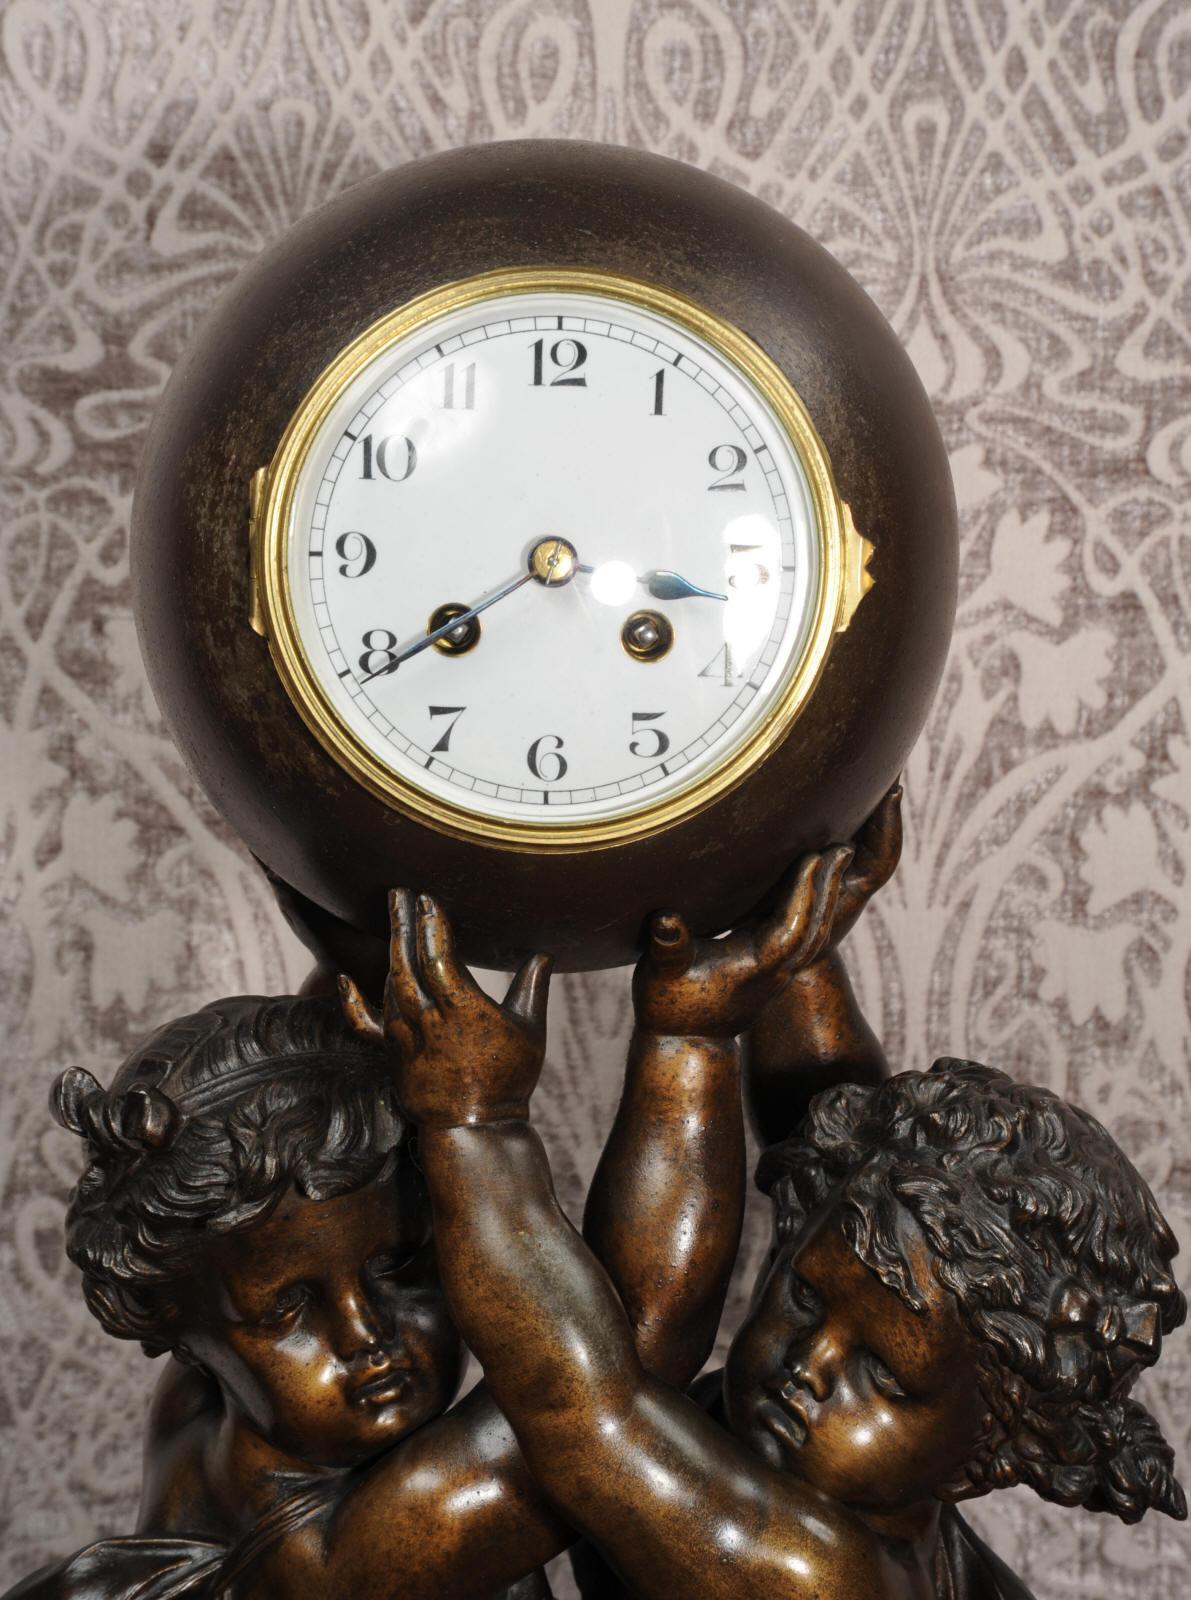 A huge and superb bronzed metal clock by the celebrated sculptor Albert Ernst Carrier-Belleuse (1824-1887). Two beautifully depicted cherubs hold the clock aloft, mounted in a bronze globe, above their heads on finger tips. Superbly modelled in